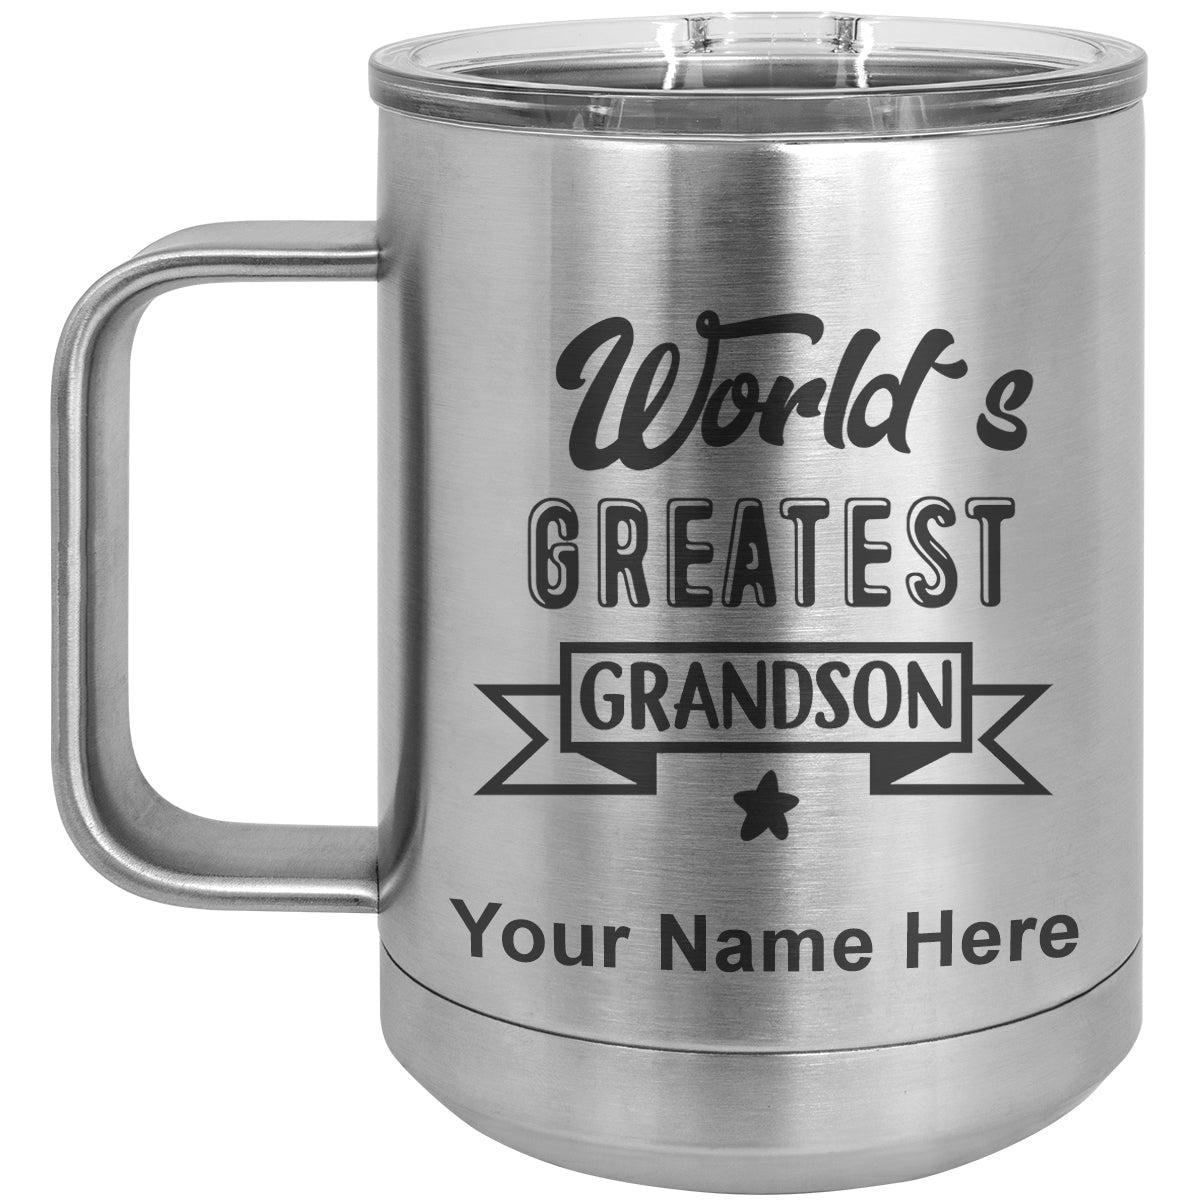 15oz Vacuum Insulated Coffee Mug, World's Greatest Grandson, Personalized Engraving Included